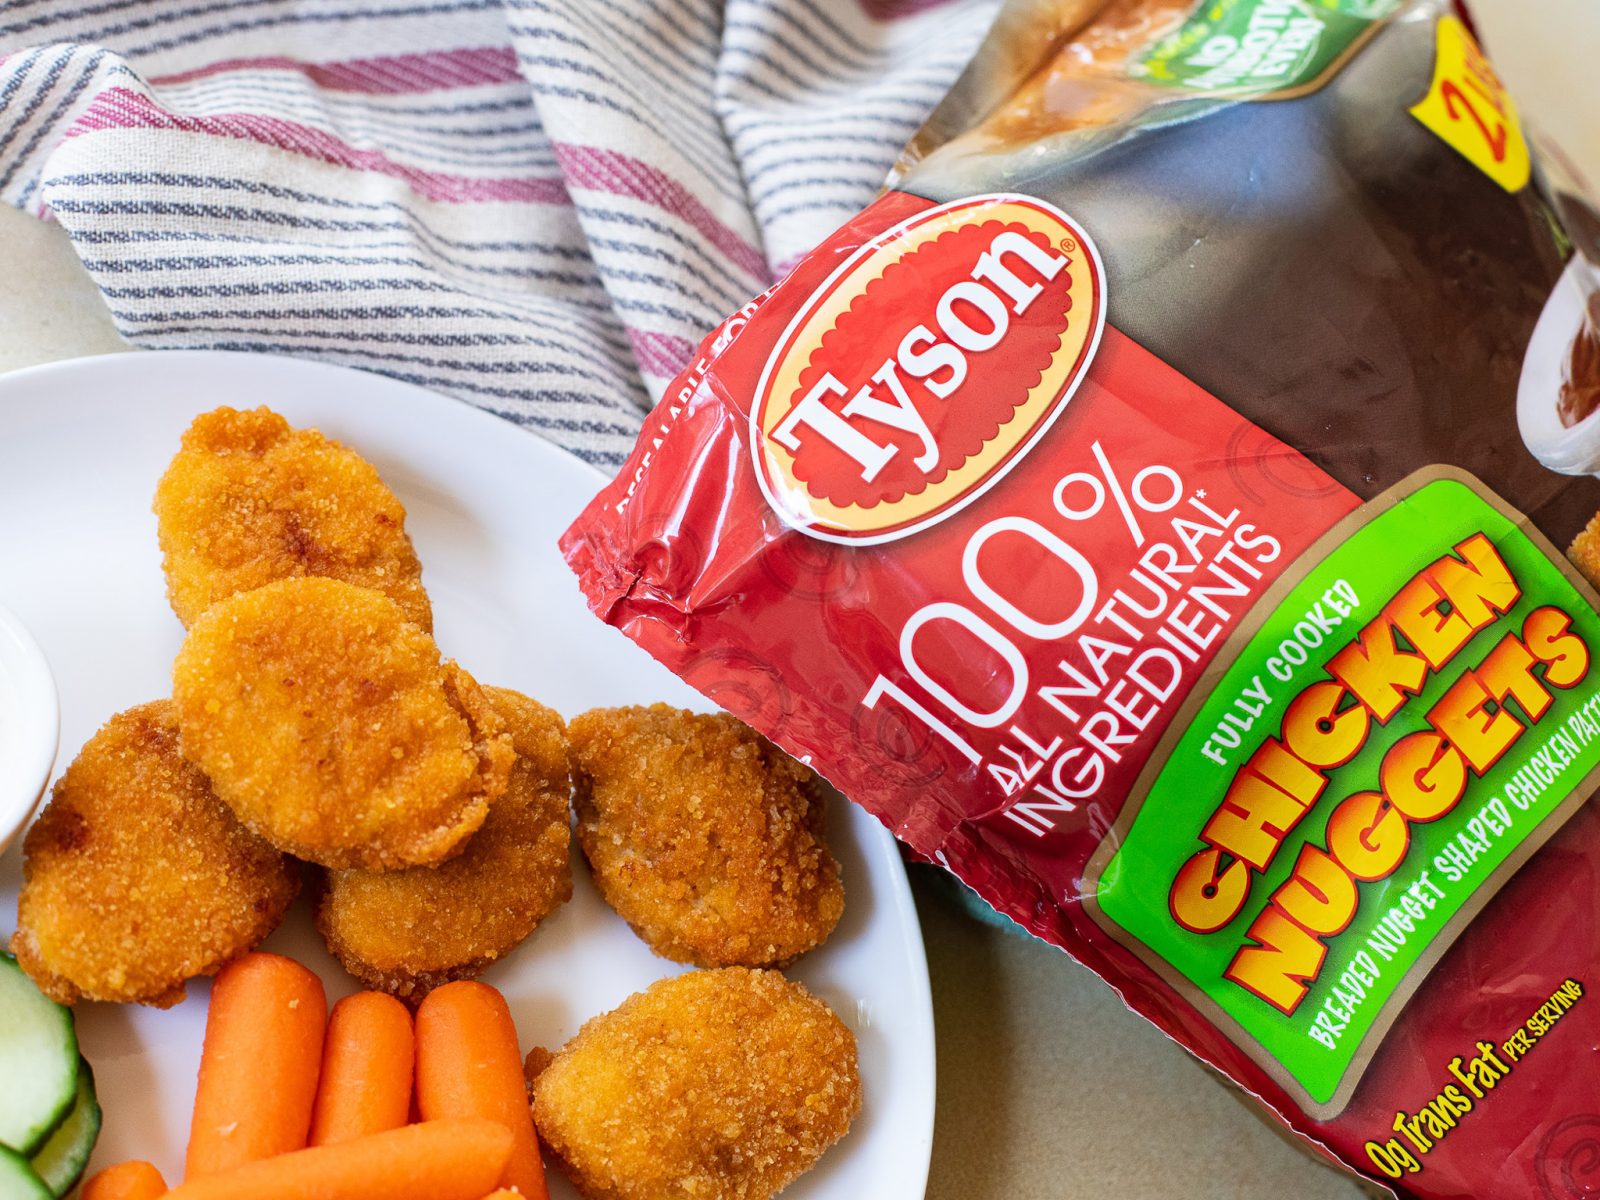 Tyson Nuggets Only $4.99 At Kroger (Regular Price $7.49)